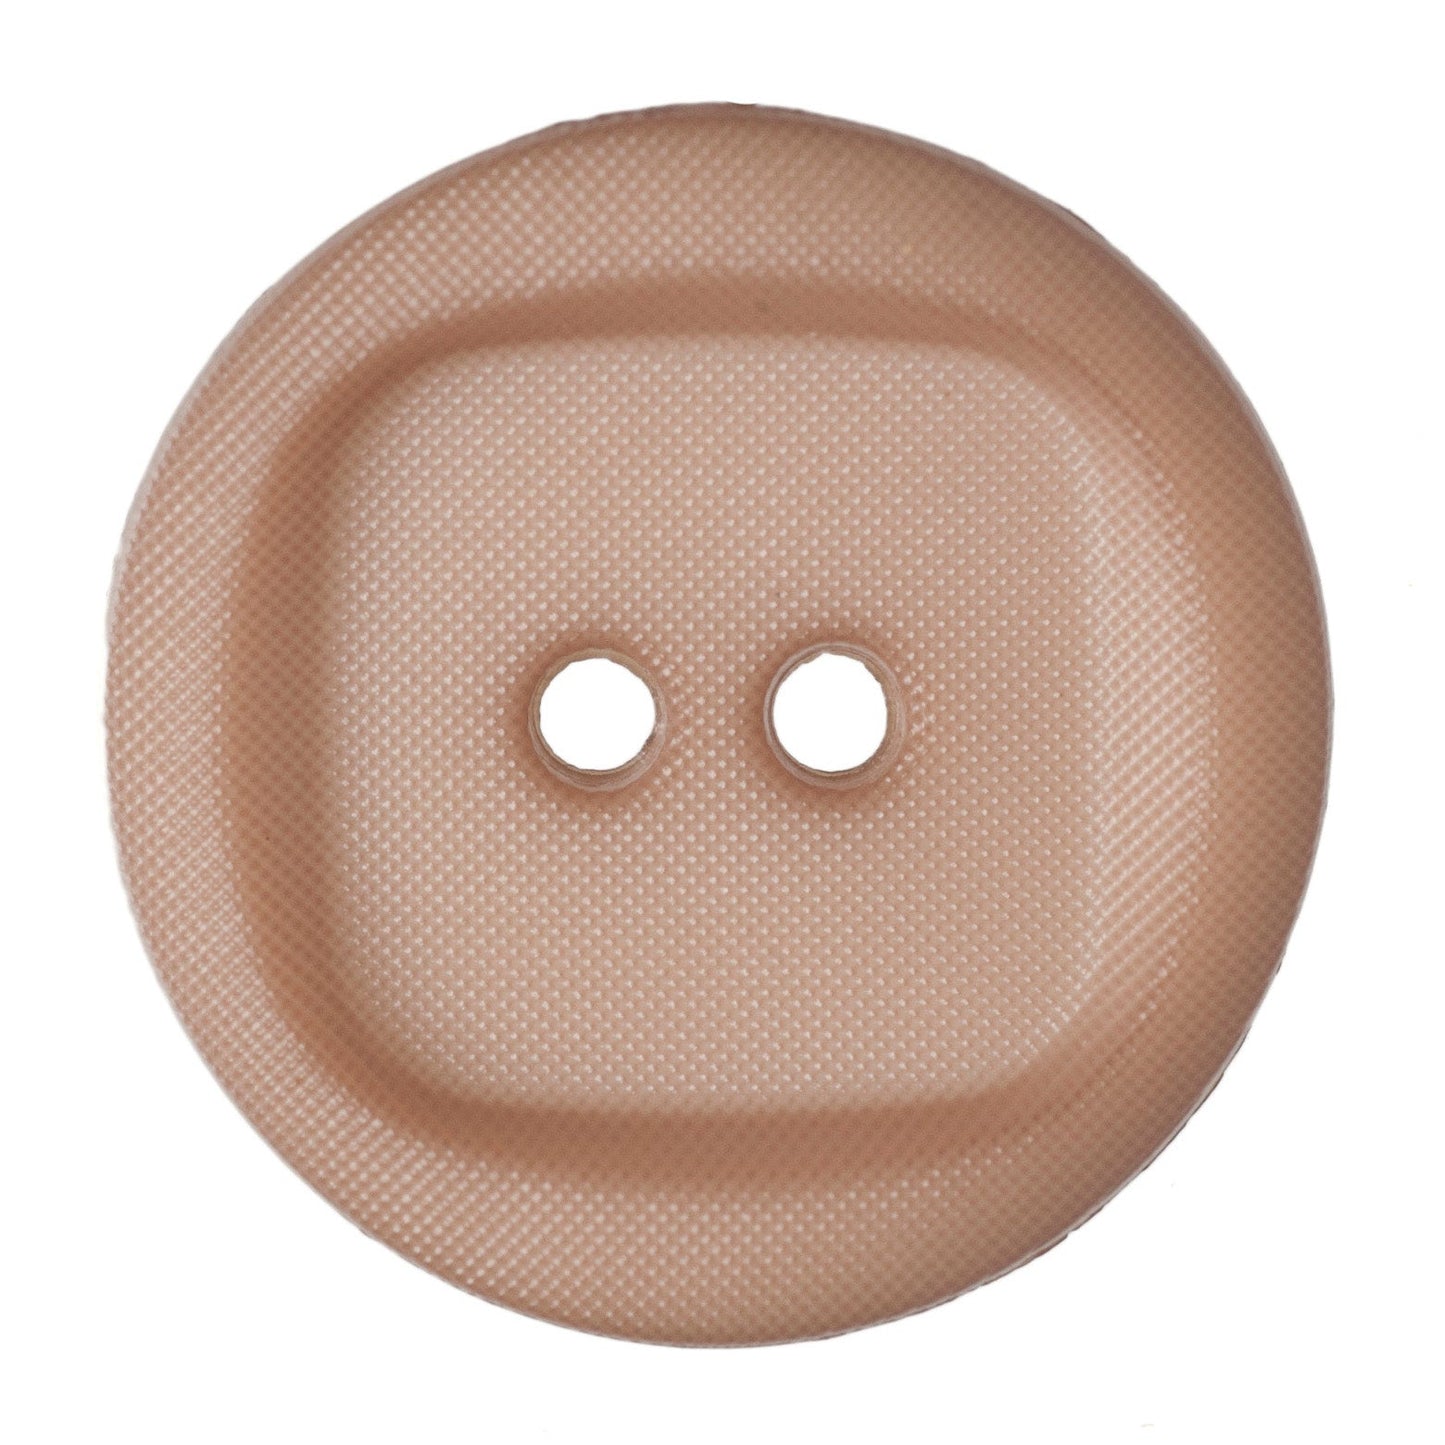 2 Hole Wavy with Square Insert Button - 28mm - Brown [LD4.1]